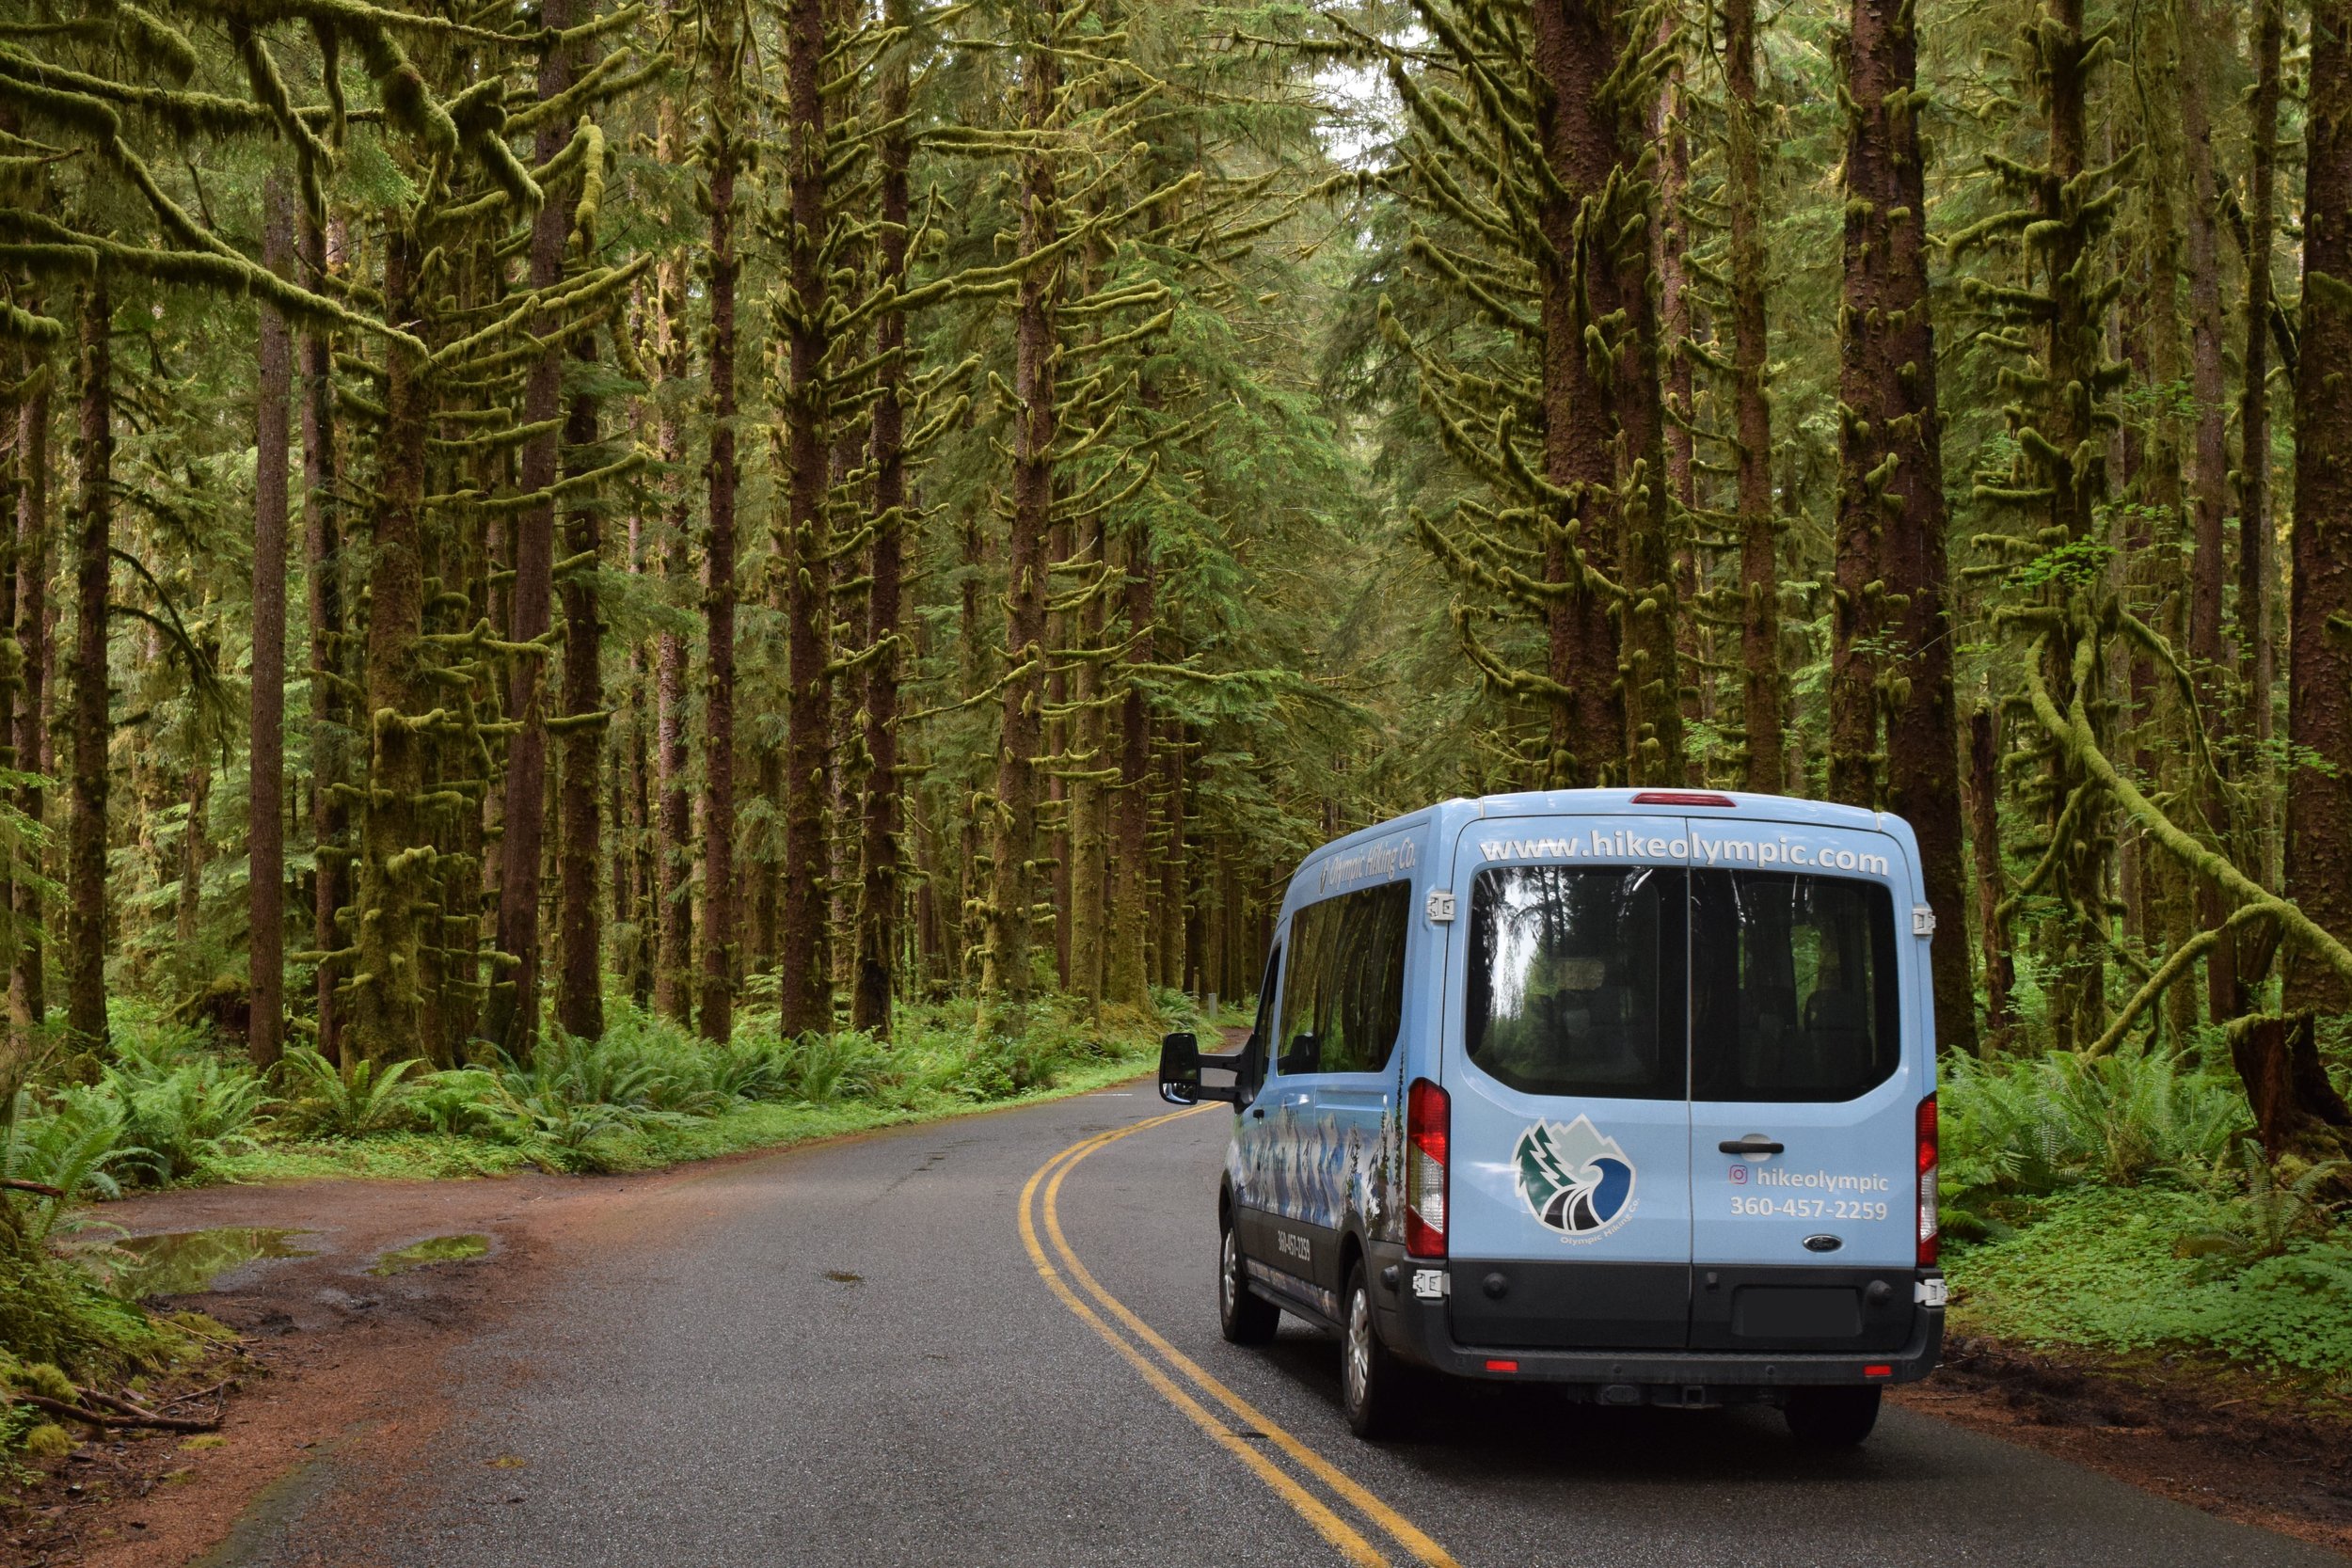   Olympic Hiking Co.   Guided Tours &amp; Shuttles in Olympic National Park 